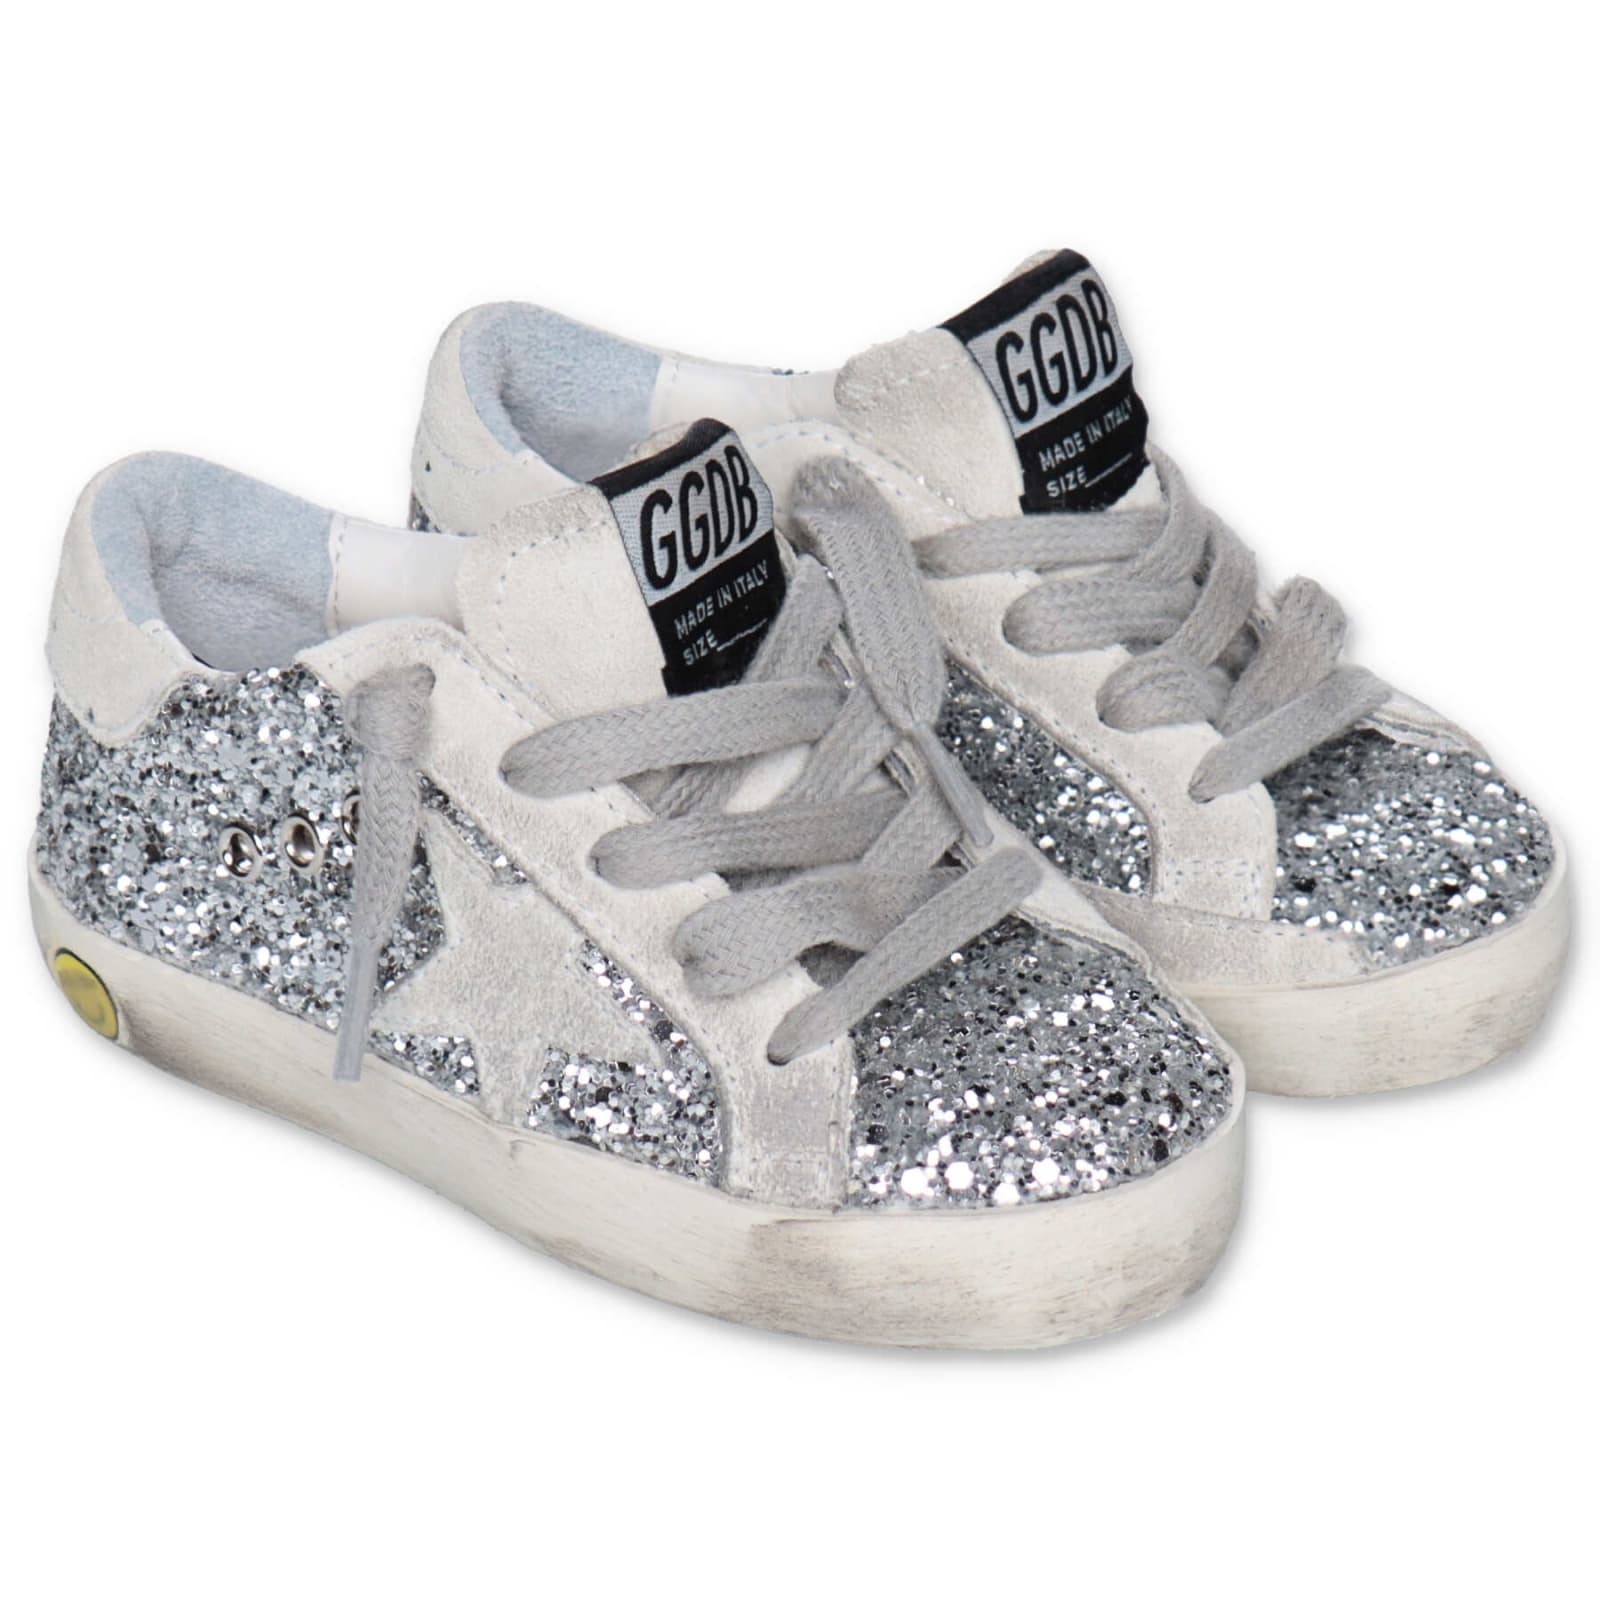 Golden Goose Sneakers Argento Glitterate